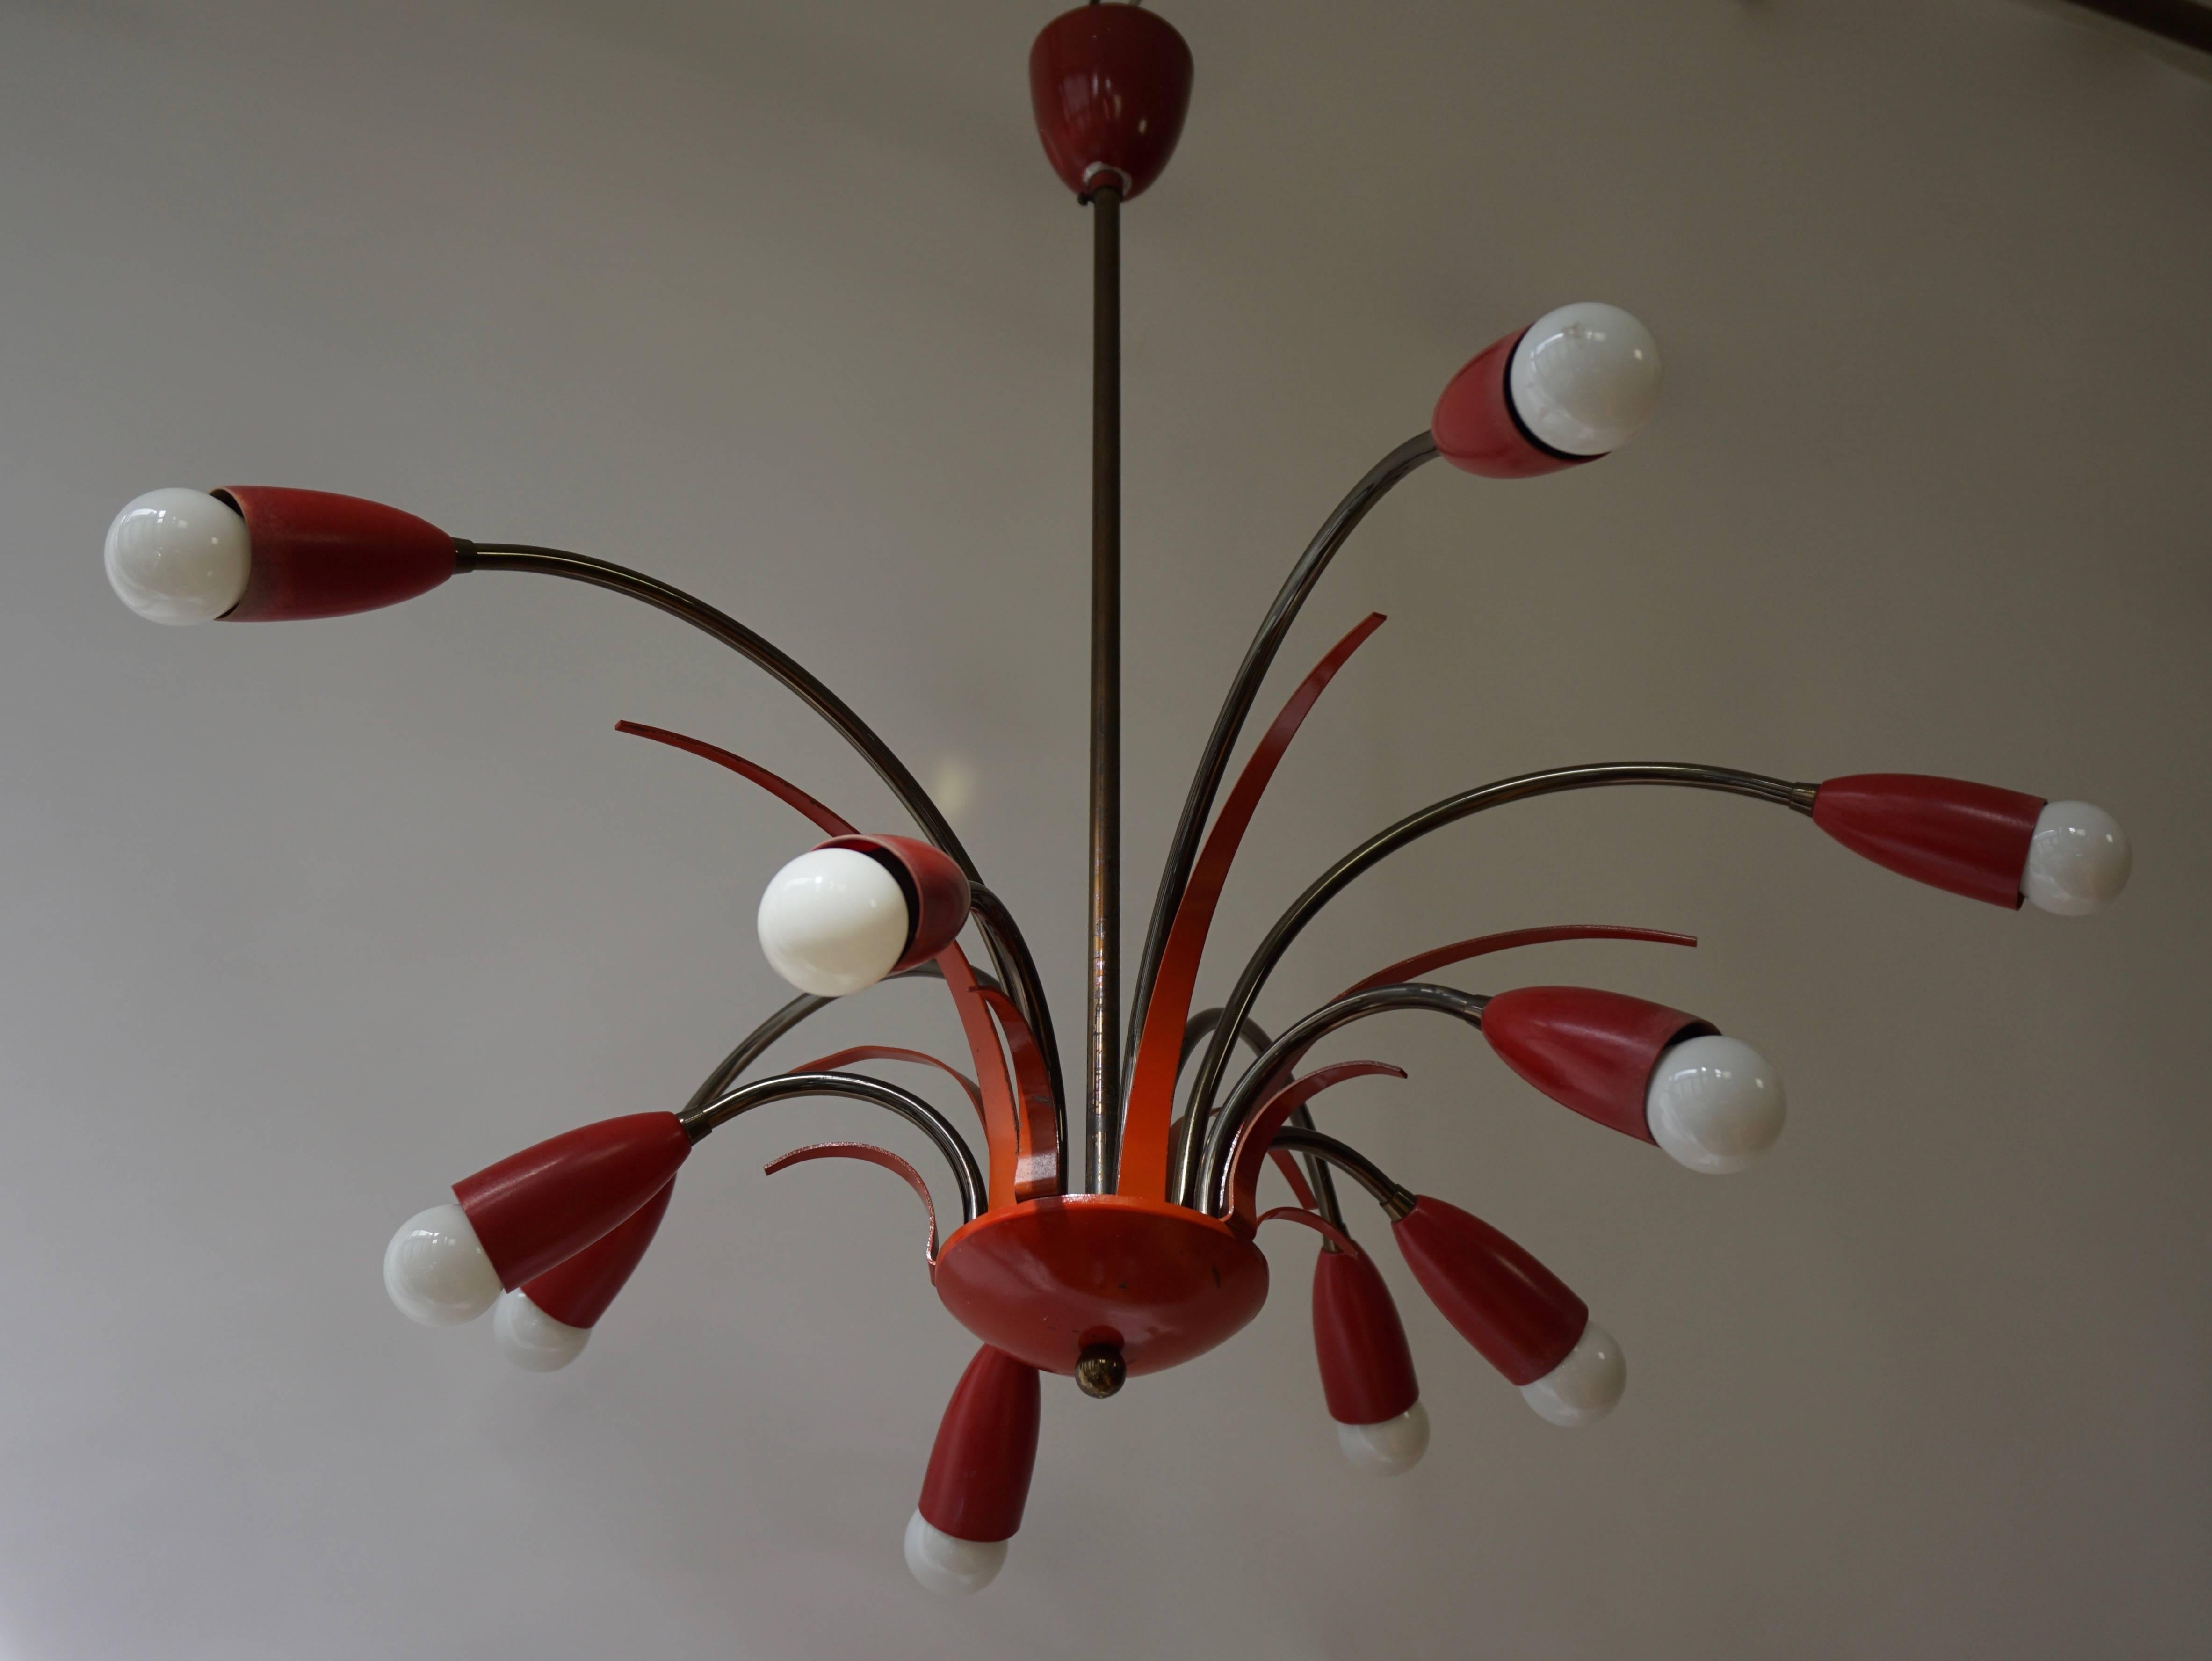 1950s pendant with beautiful and quality details. Controlled to the ten pieces of E14 sockets.